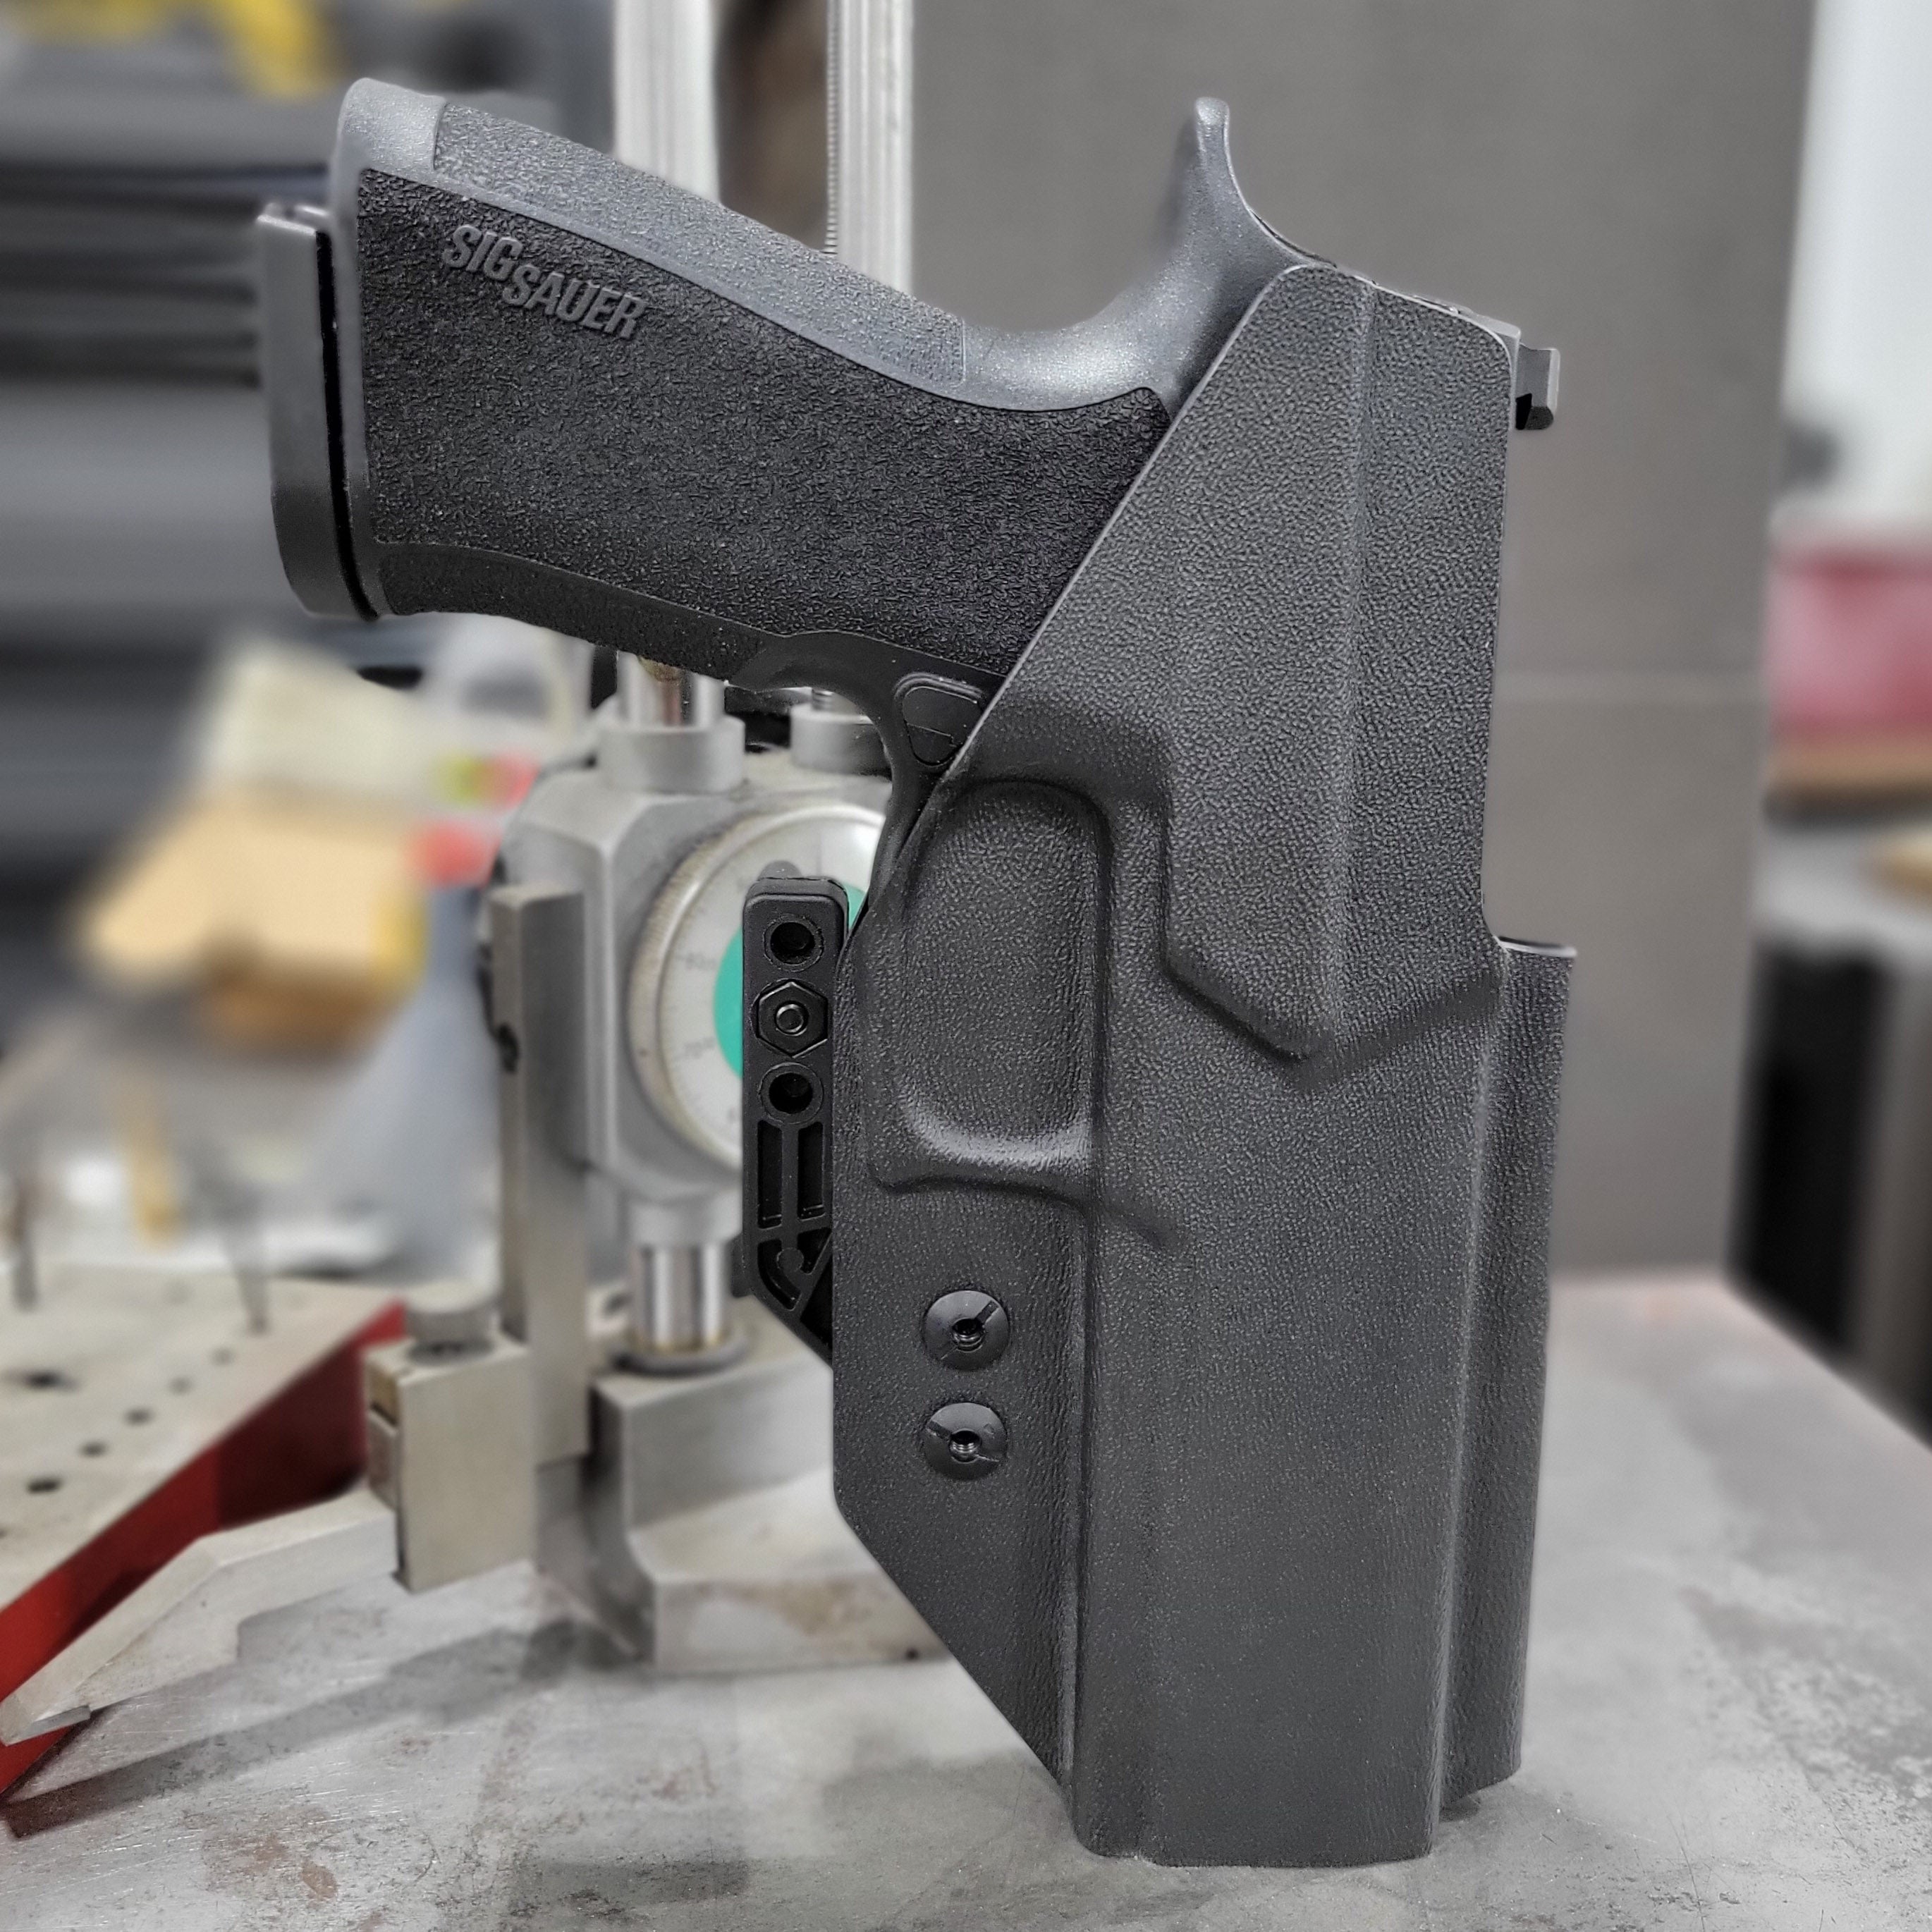 Our Left Hand Inside Waistband IWB Kydex Taco Style Holster designed to fit the Sig Sauer 10MM . Full sweat guard, adjustable retention, open muzzle, and profiled for a red dot sight. Proudly made in the USA for veterans and law enforcement. 10 MM P320-XTEN, P320 X Ten or P 320 XTEN.